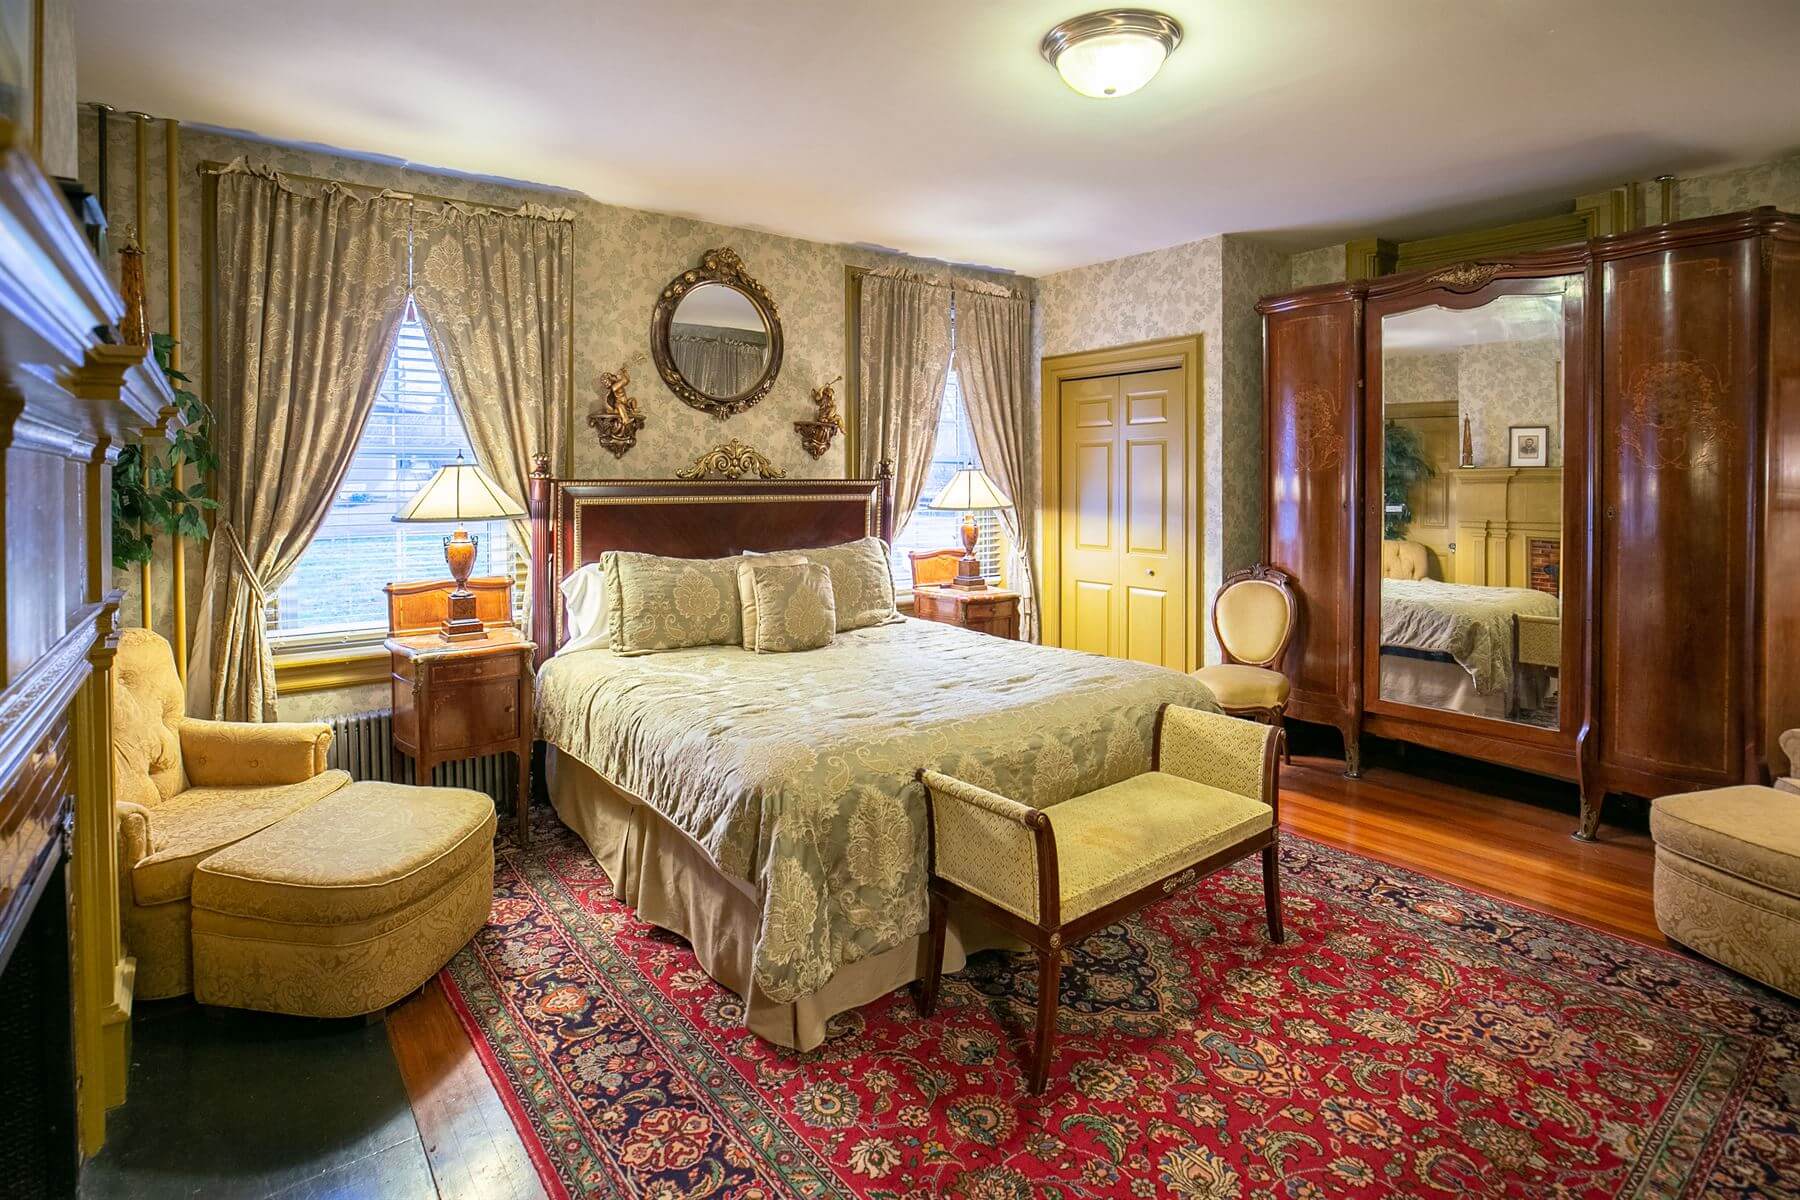 #14 US Grant Room: King Bed